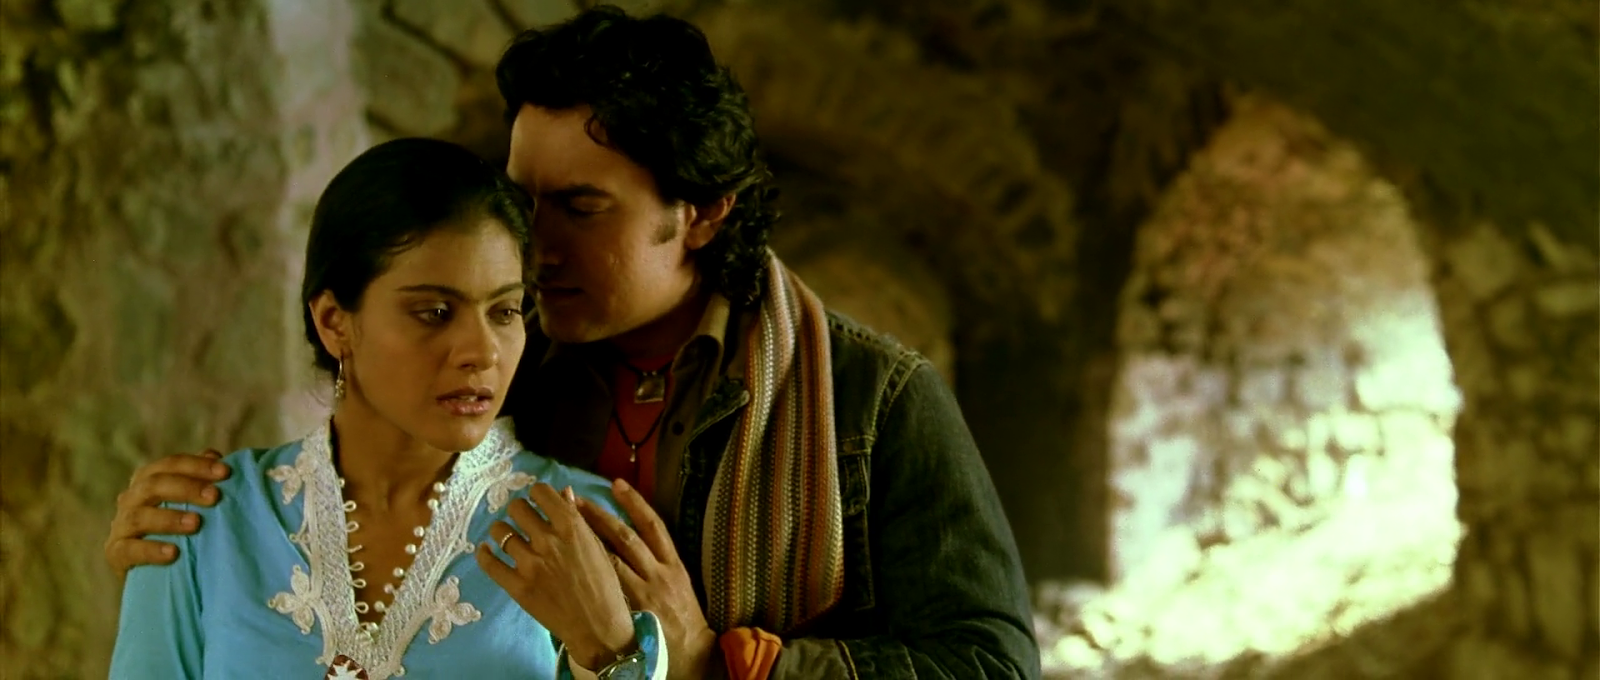 fanaa movie download with english subtitles